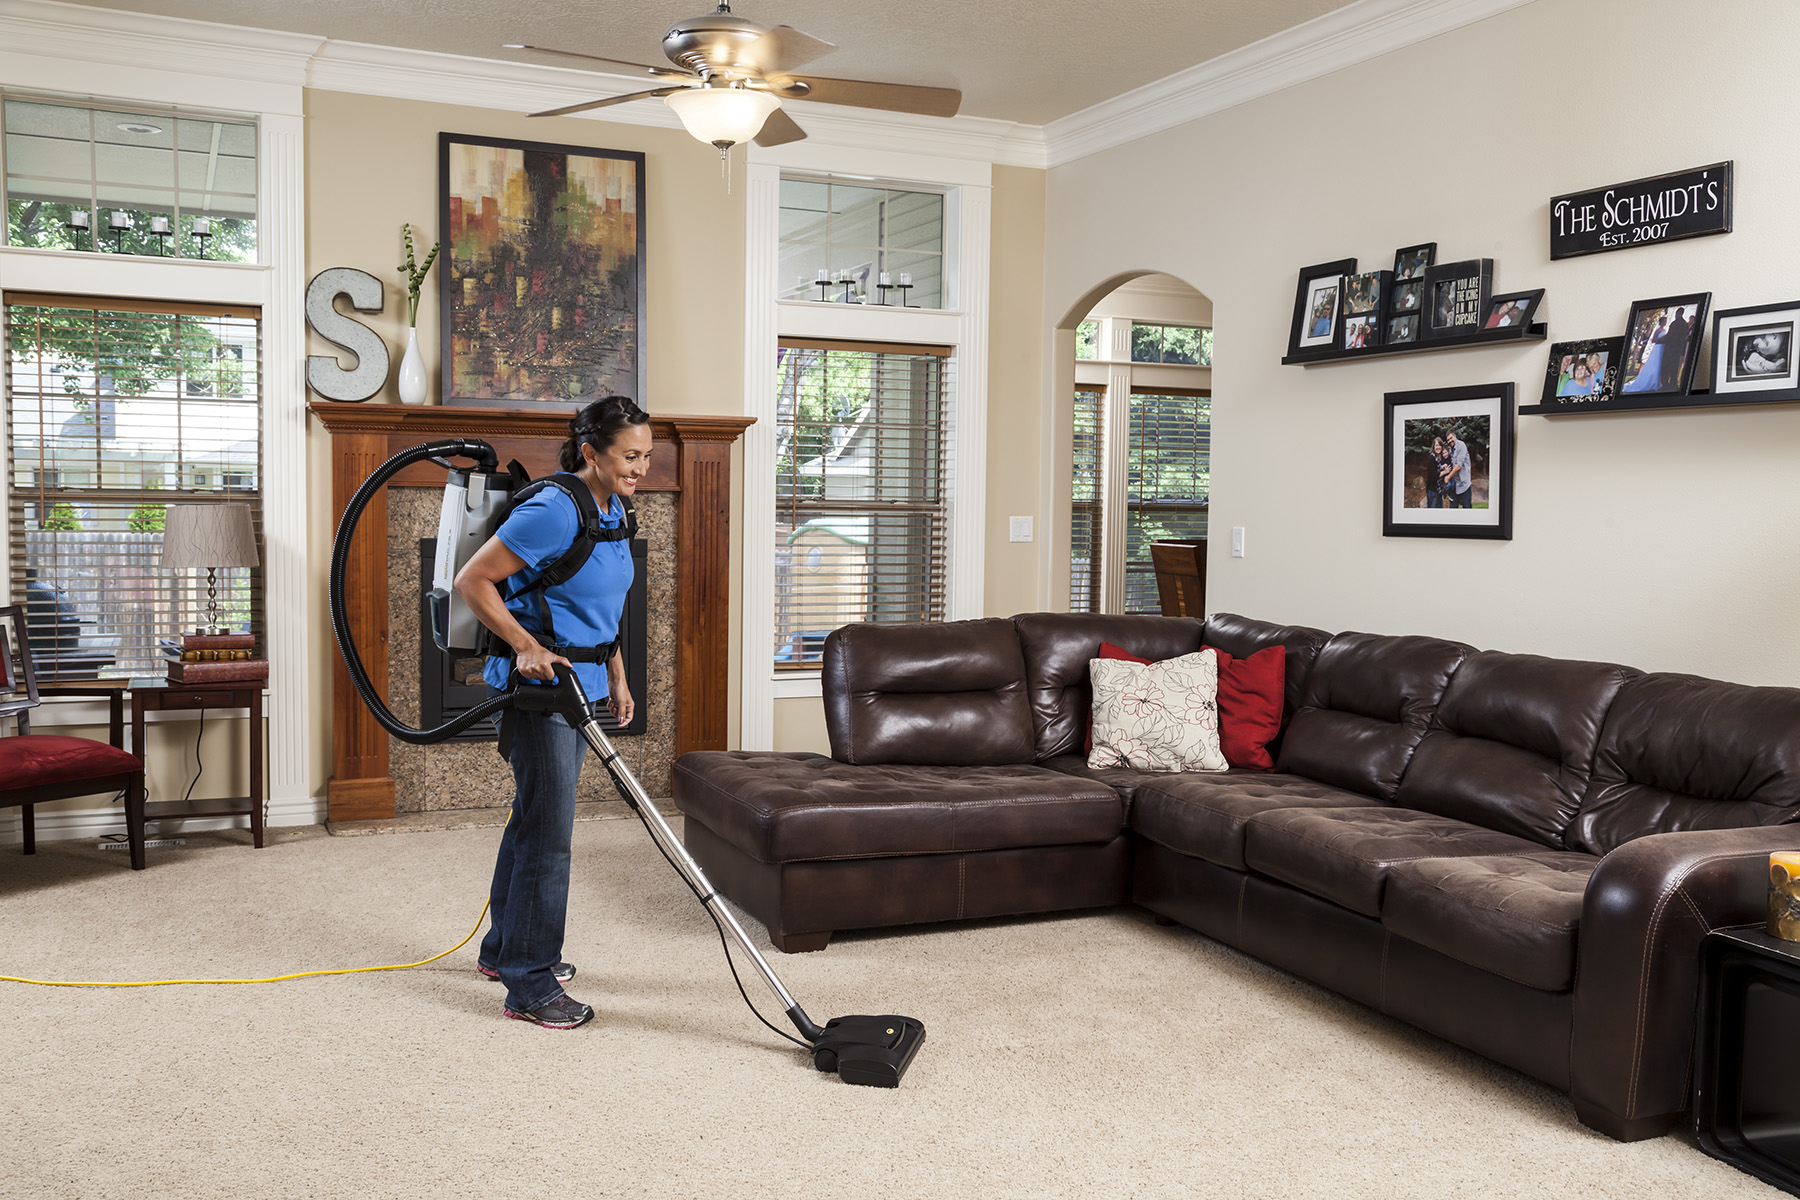 Town & Country Stays on the Front Edge of Cleaning Homes with ProTeam